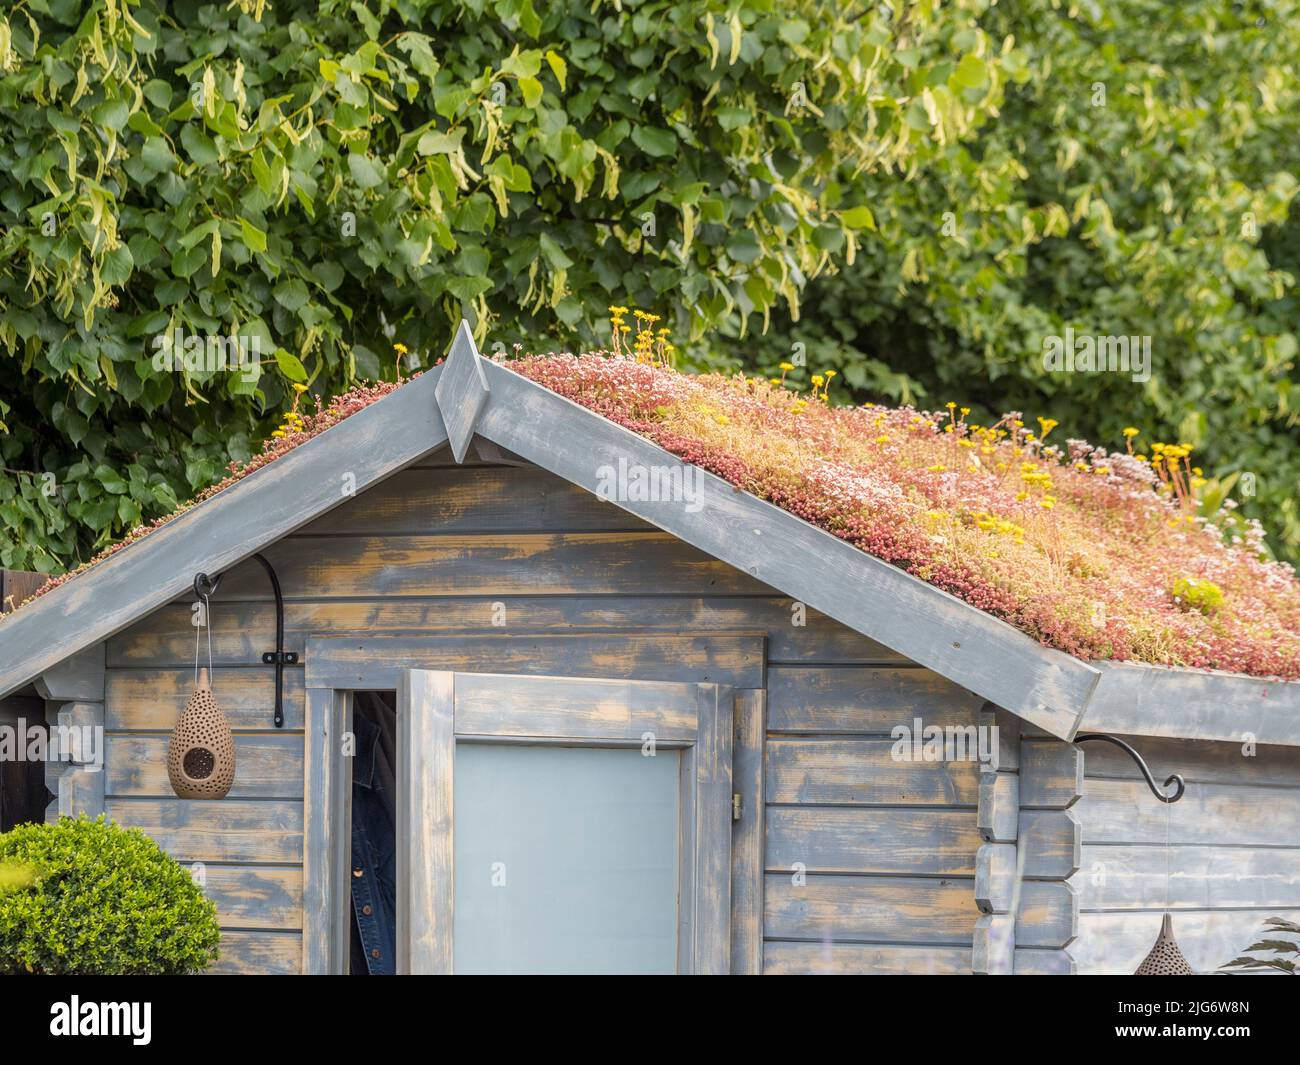 Blue-grey distressed wood garden shed with a living roof in UK garden. Stock Photo